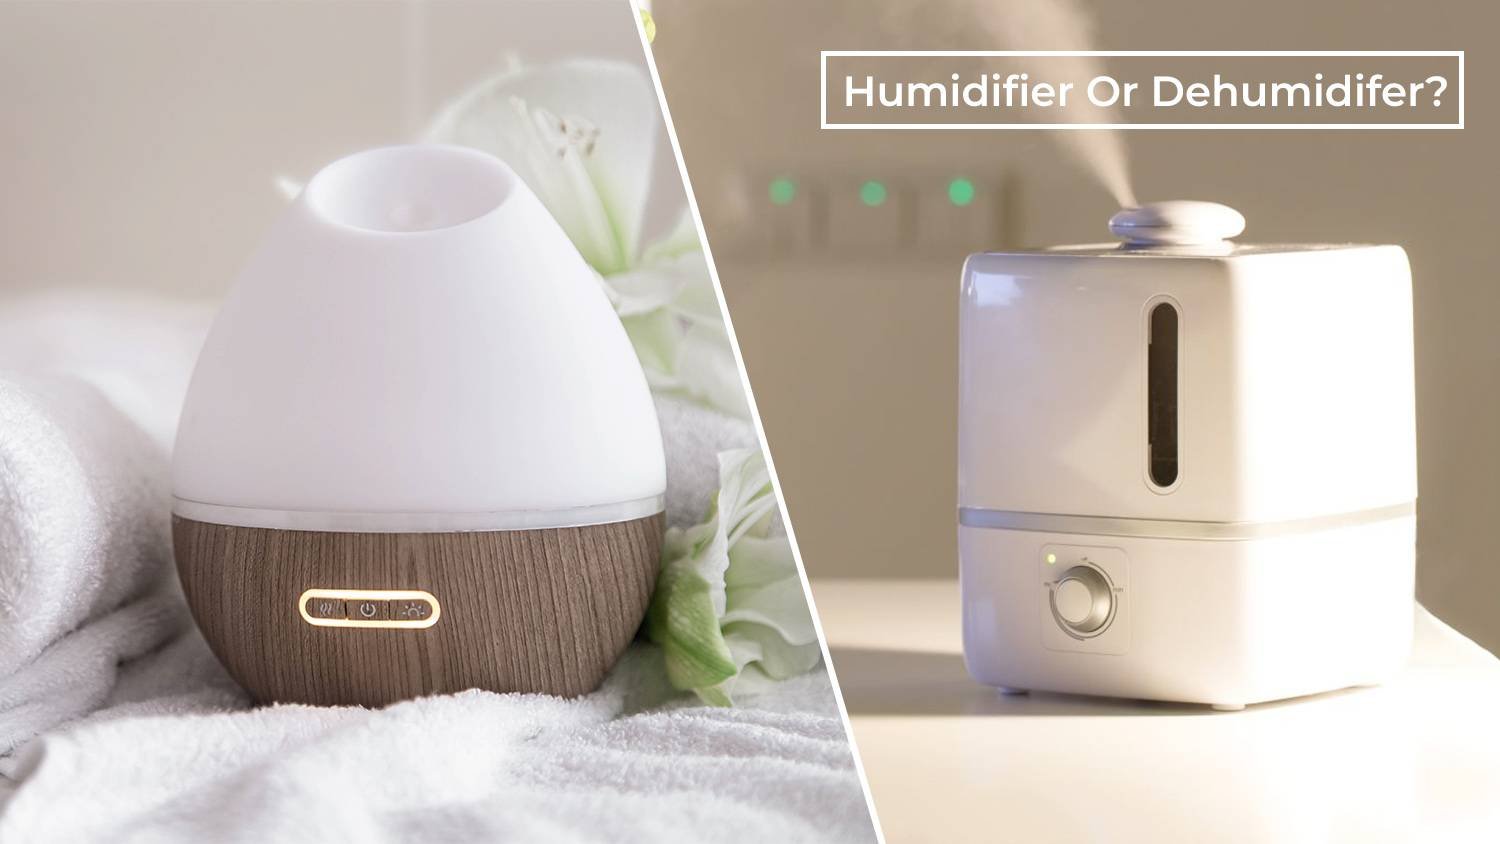 Humidifier vs. Dehumidifier? A Detailed Comparison to Help You Make the Right Choice (Benefits, Costs, and More)